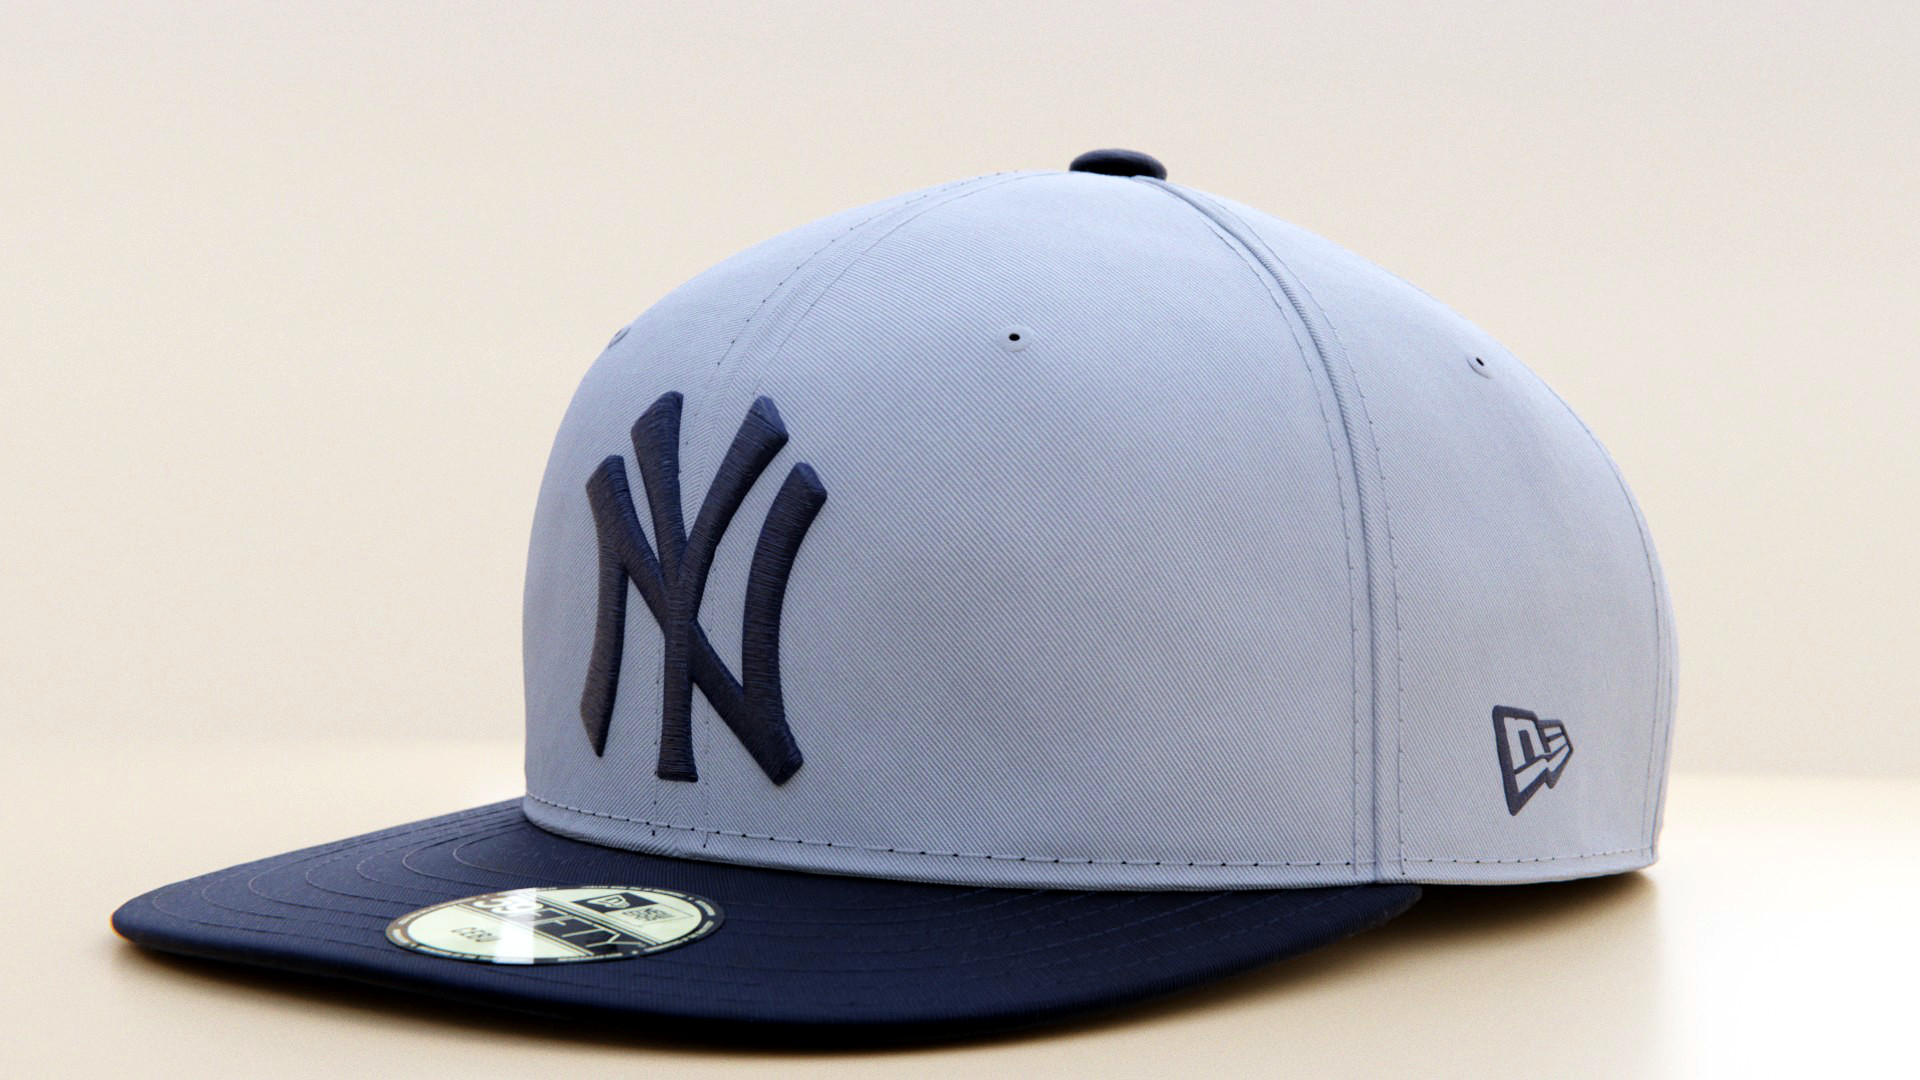 New York Yankees Baseball Cap - Finished Projects - Blender Artists ...